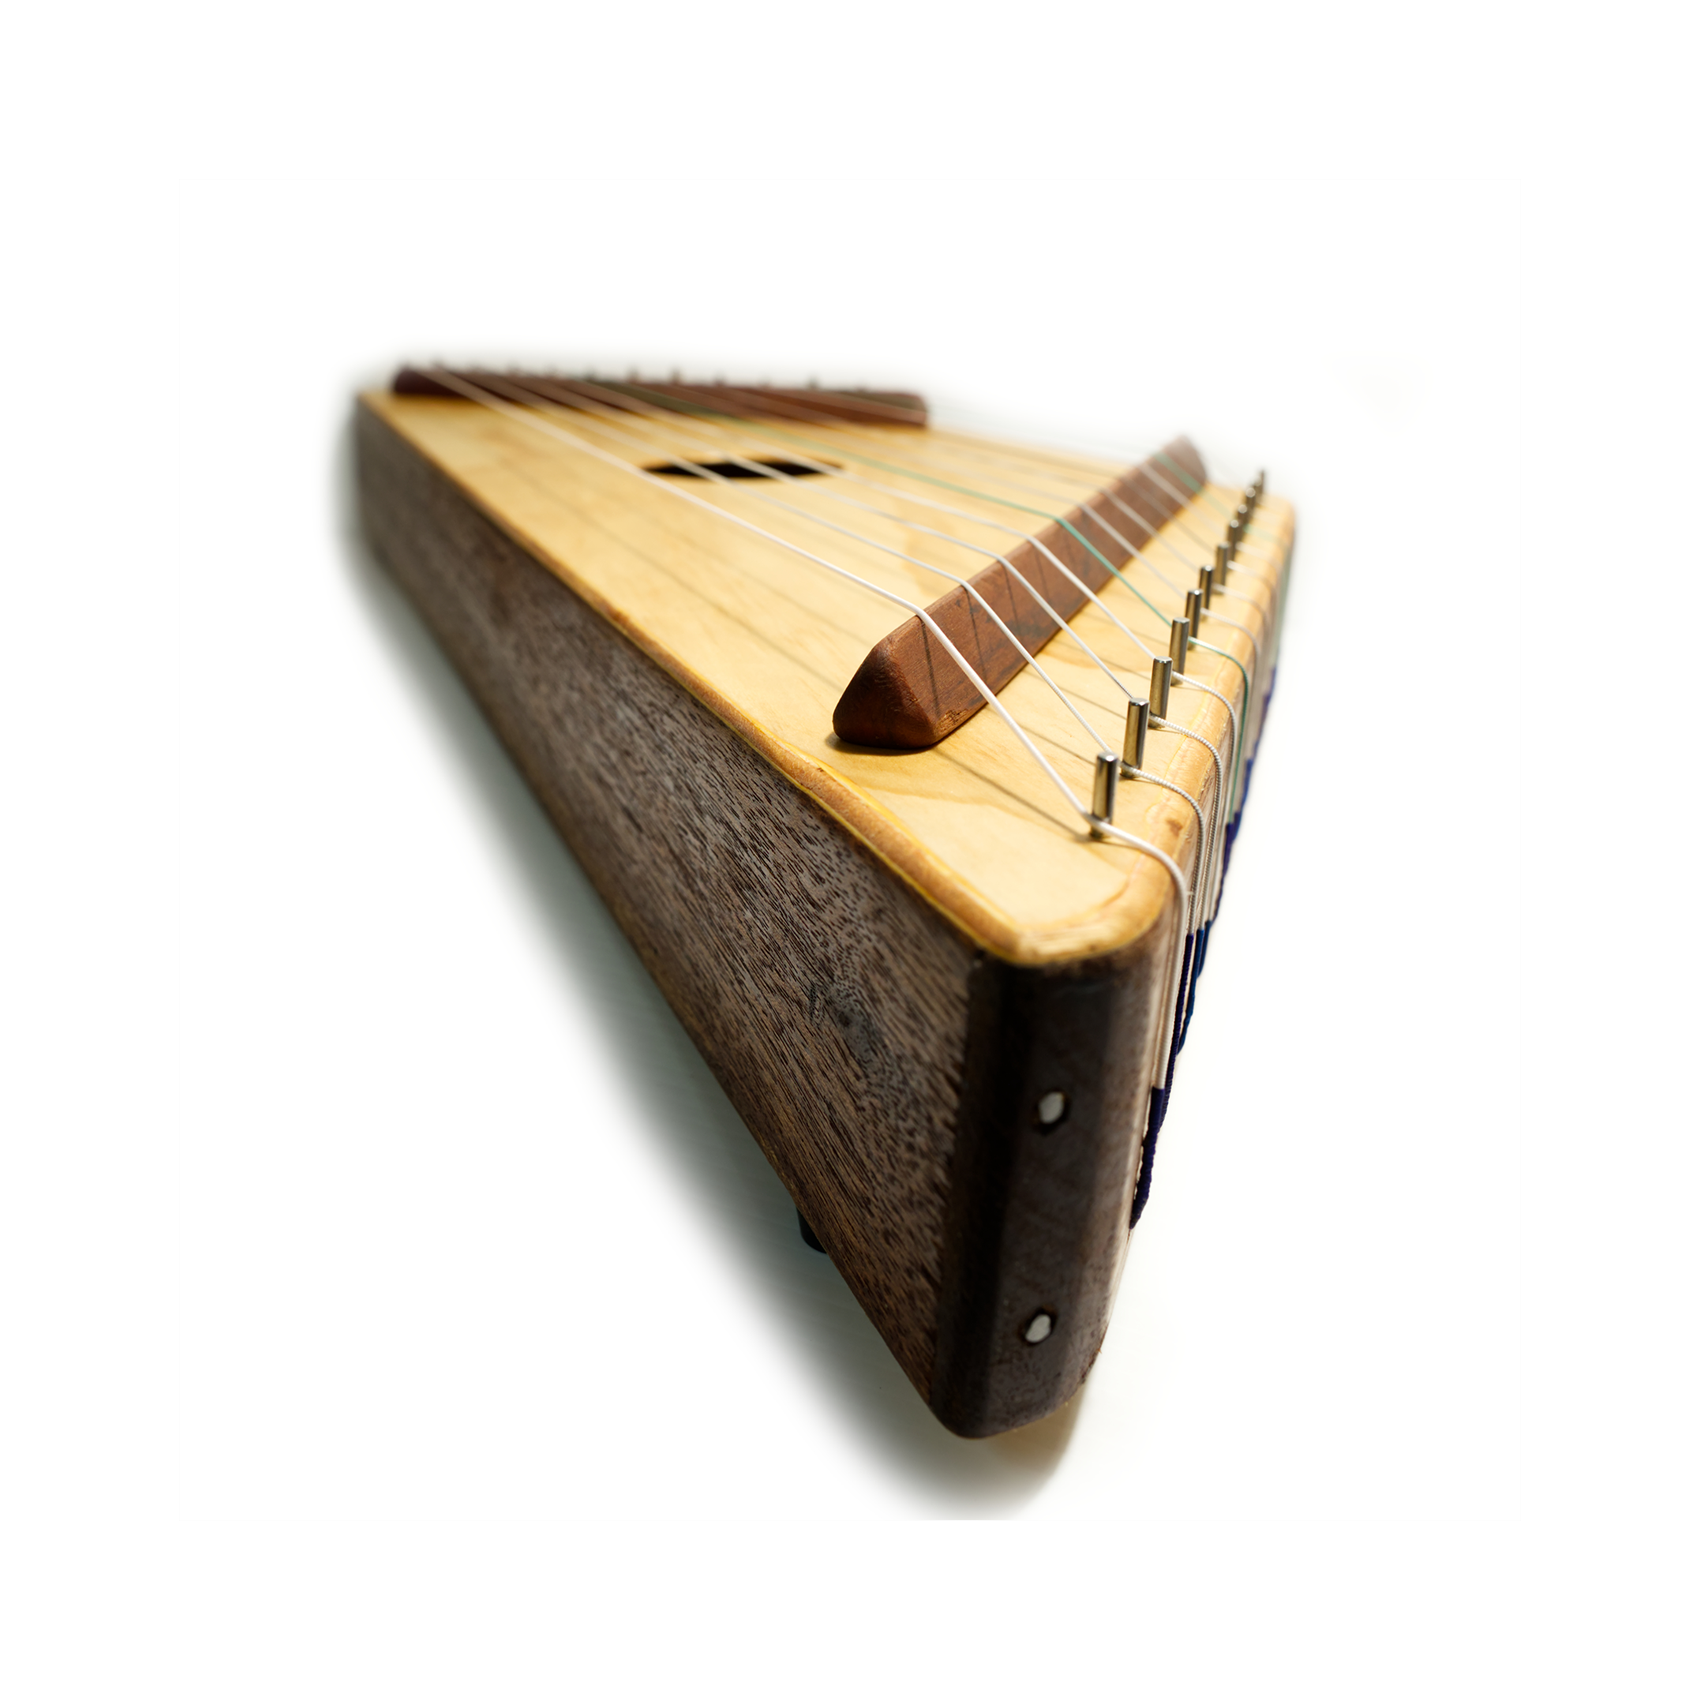 Son of drum - Zither - 12 String by Umaji Creations